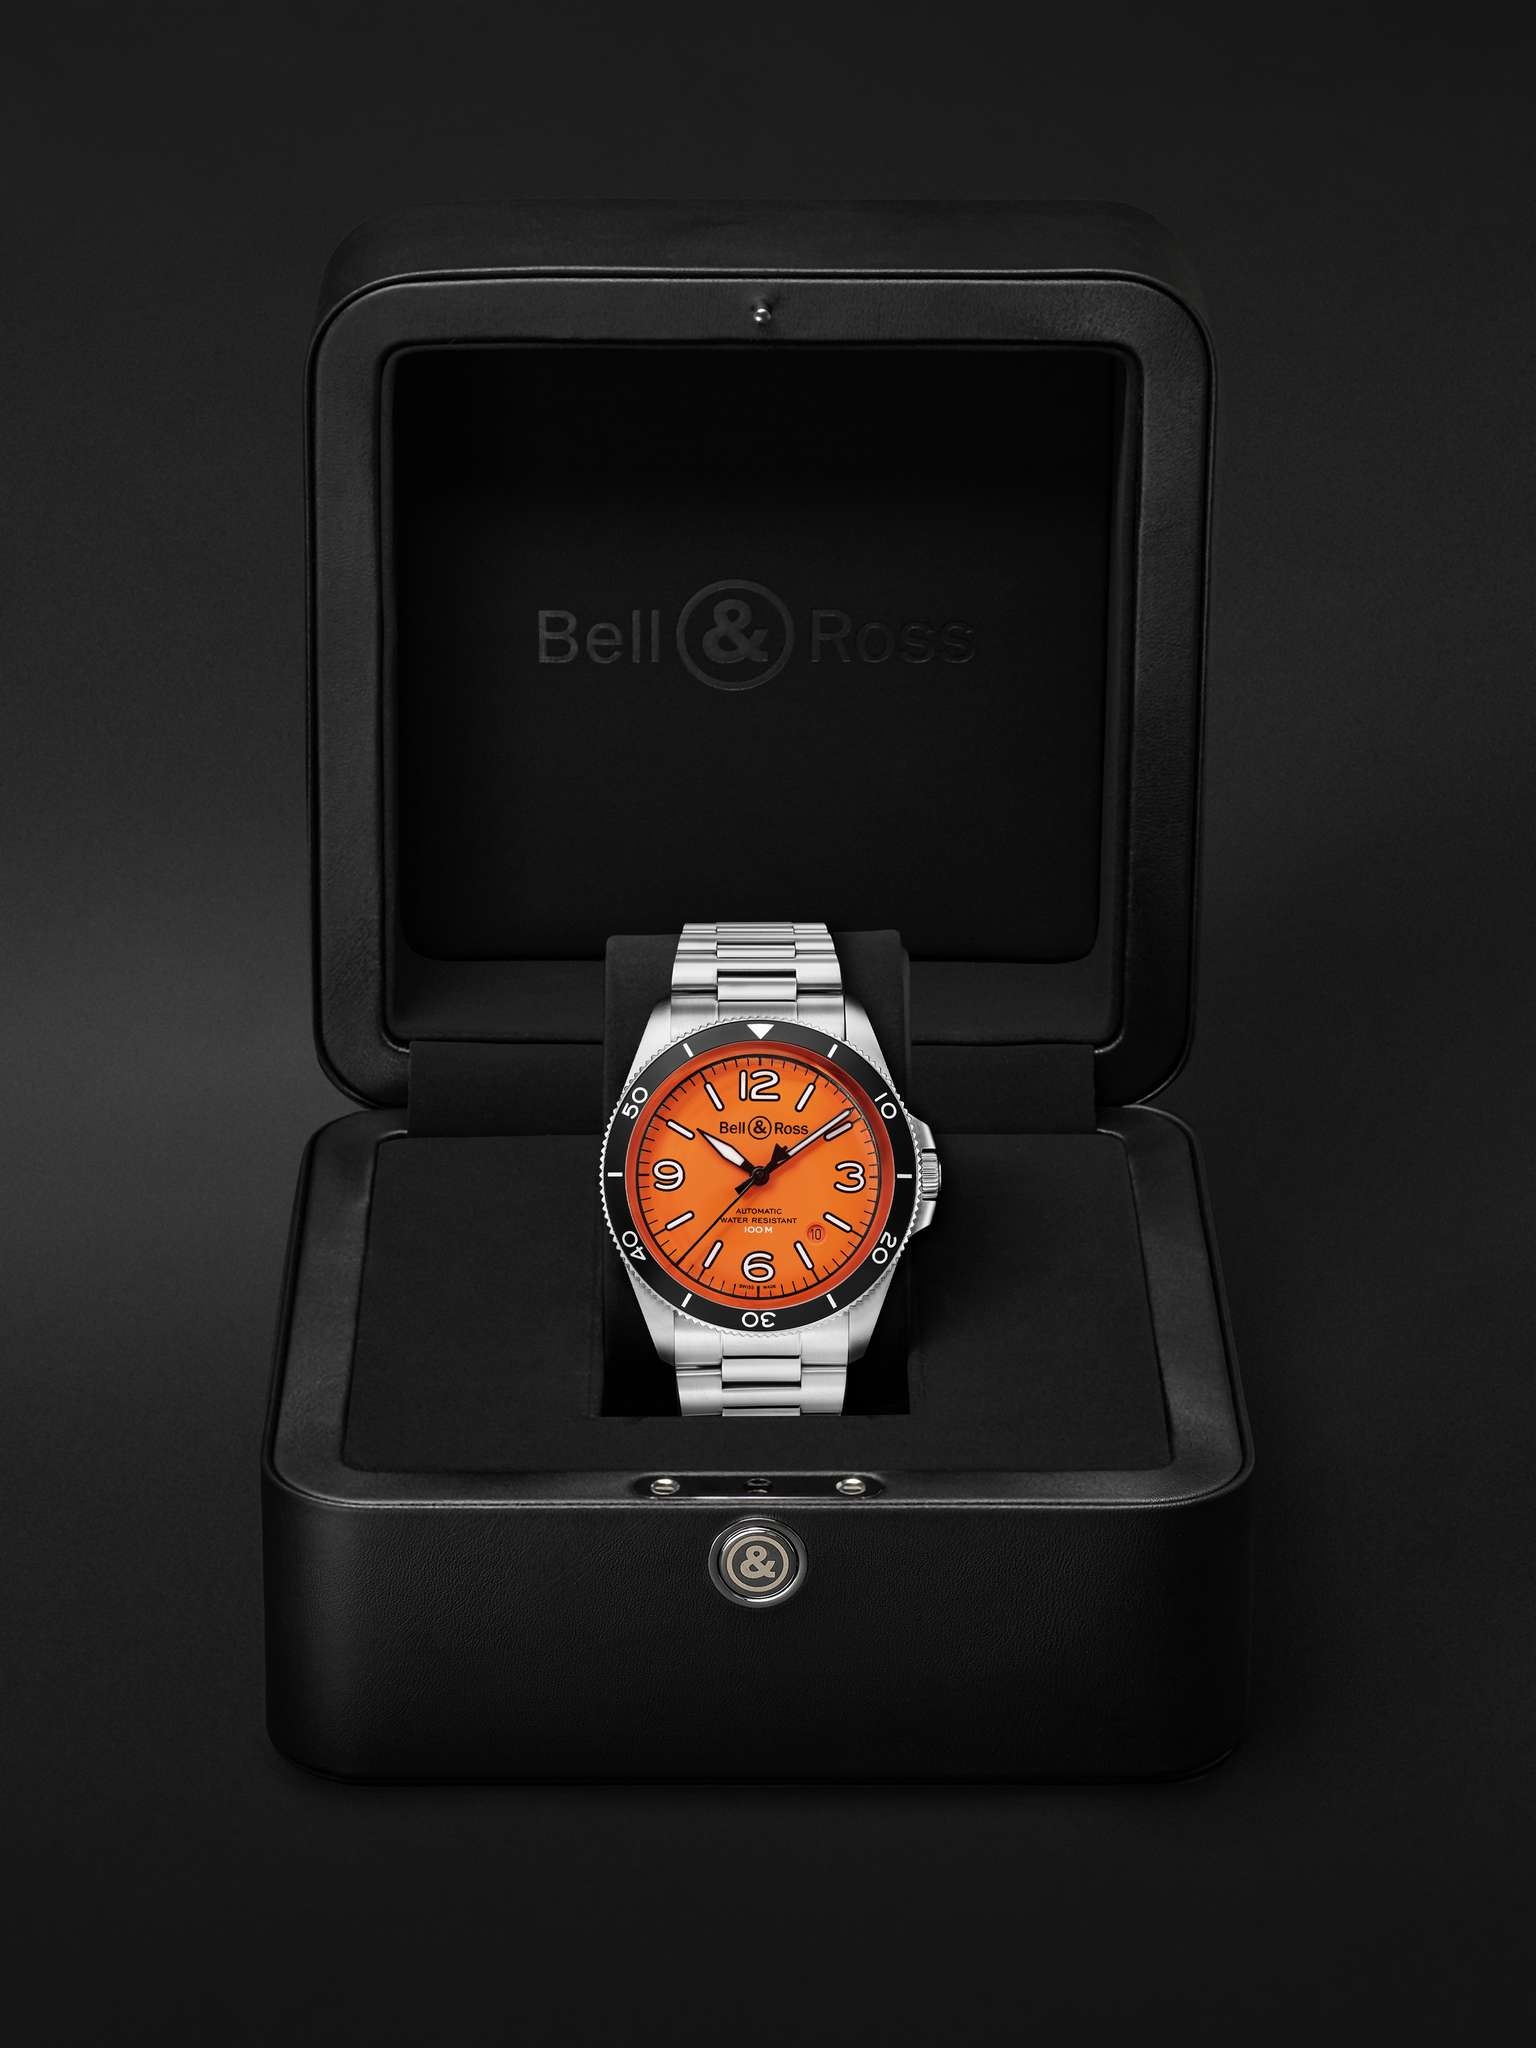 BR V2-92 Orange Limited Edition Automatic 41mm Stainless Steel Watch, Ref. No. BRV292-O-ST/SST - 8